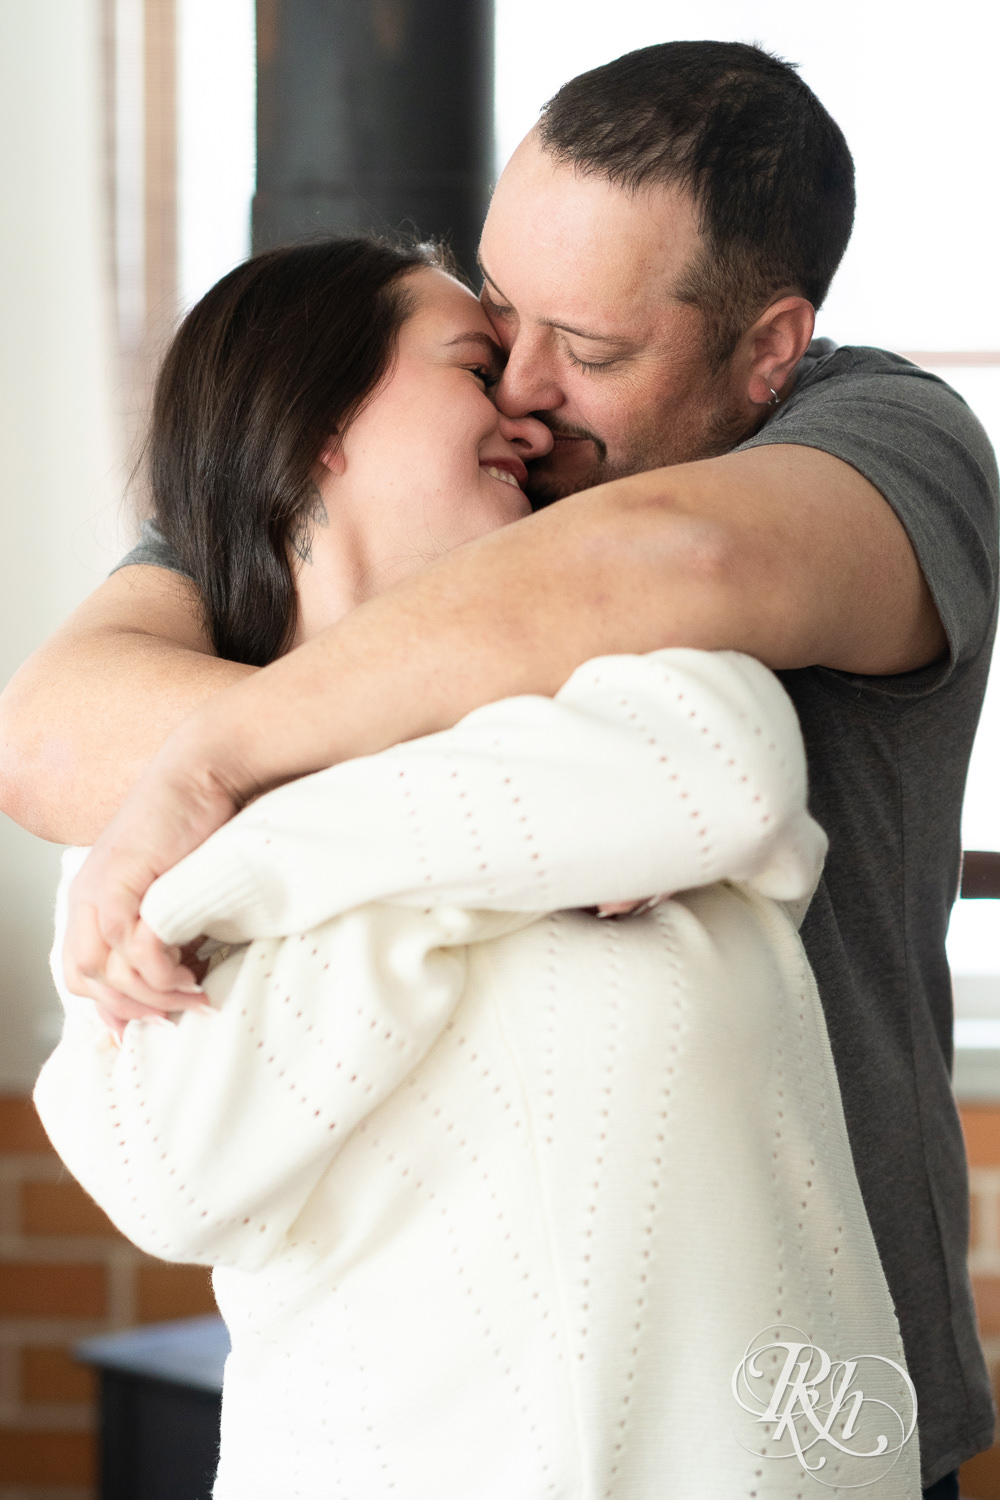 Man and woman in jeans and sweaters snuggle in a cabin in Pine City, Minnesota during engagement photography.